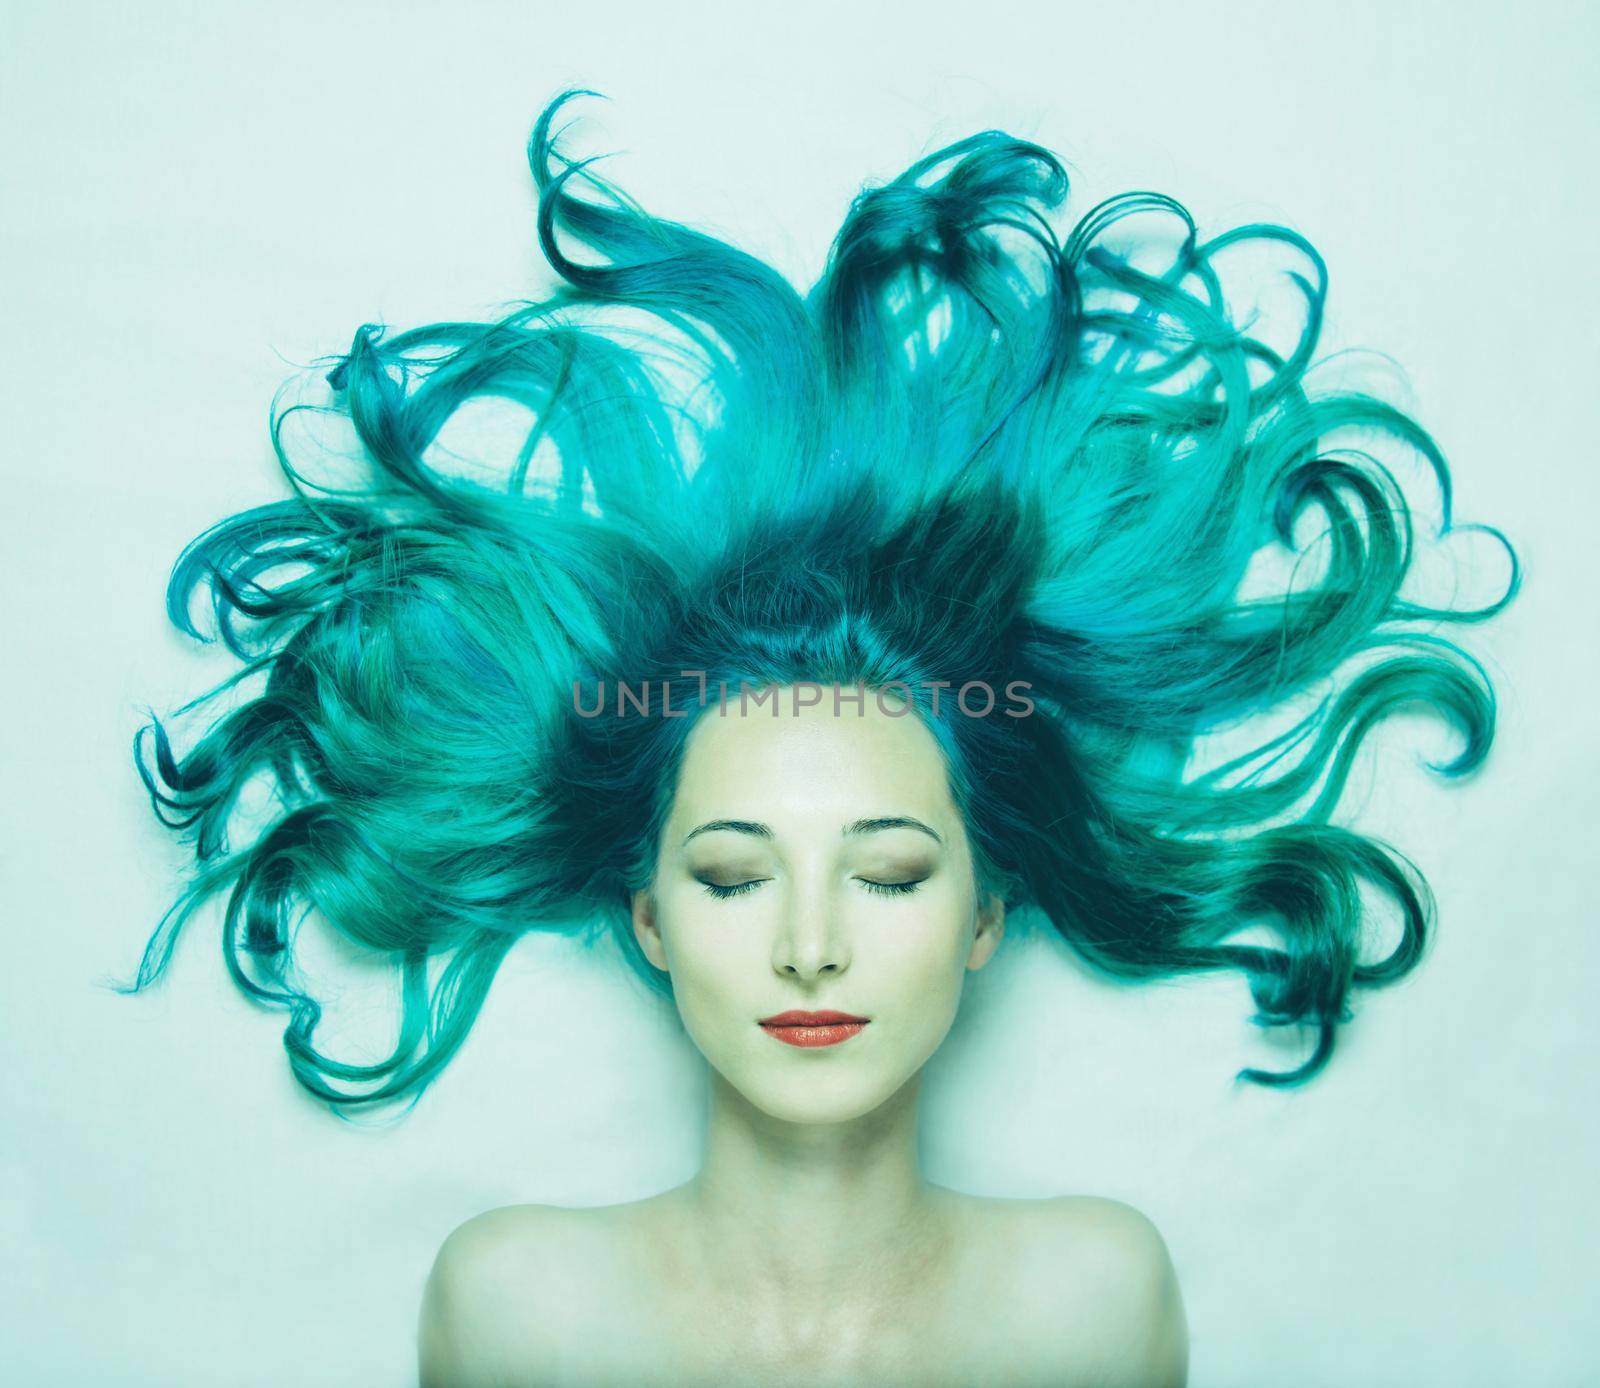 Portrait of smiling beautiful young woman with closed eyes and long hair of turquoise color, top view. Image of mermaid